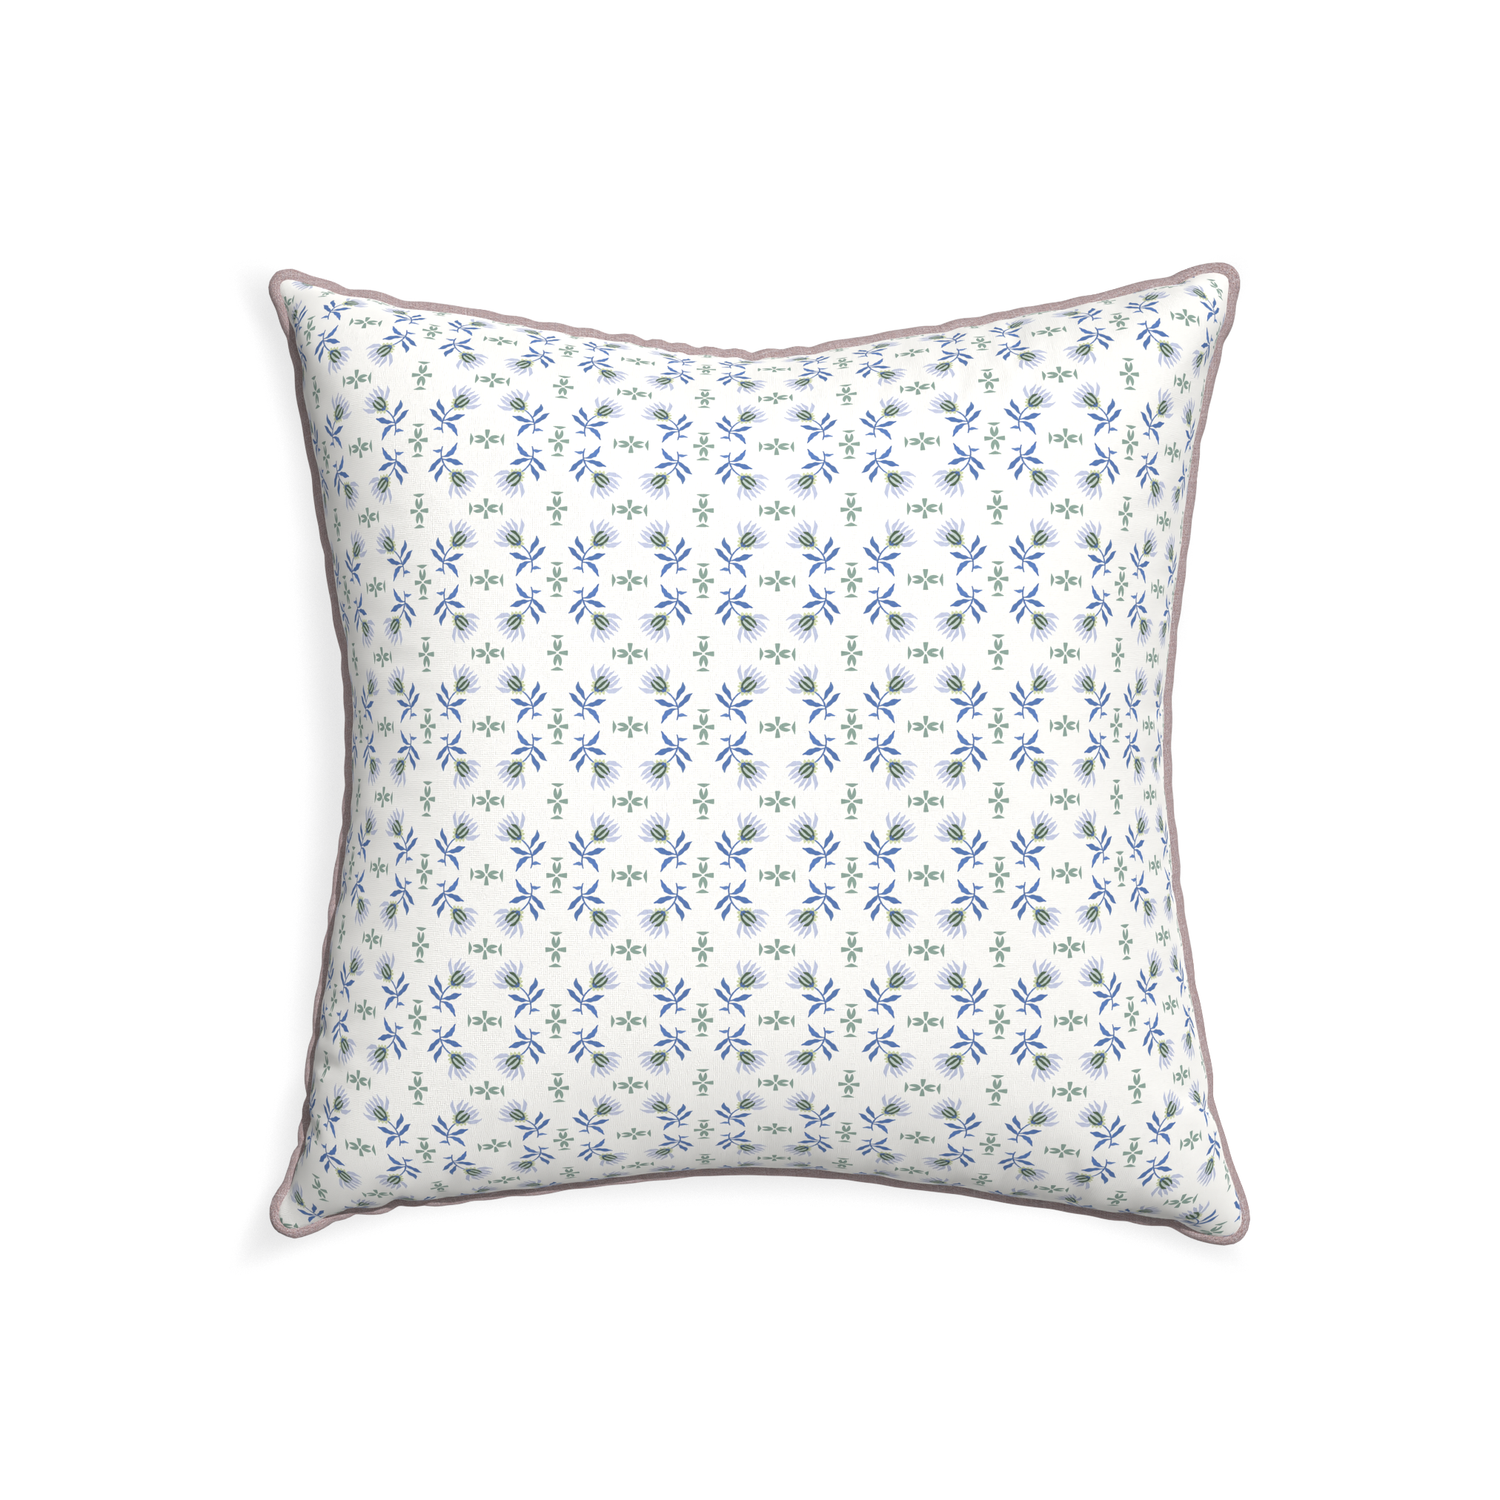 22-square lee custom blue & green floralpillow with orchid piping on white background